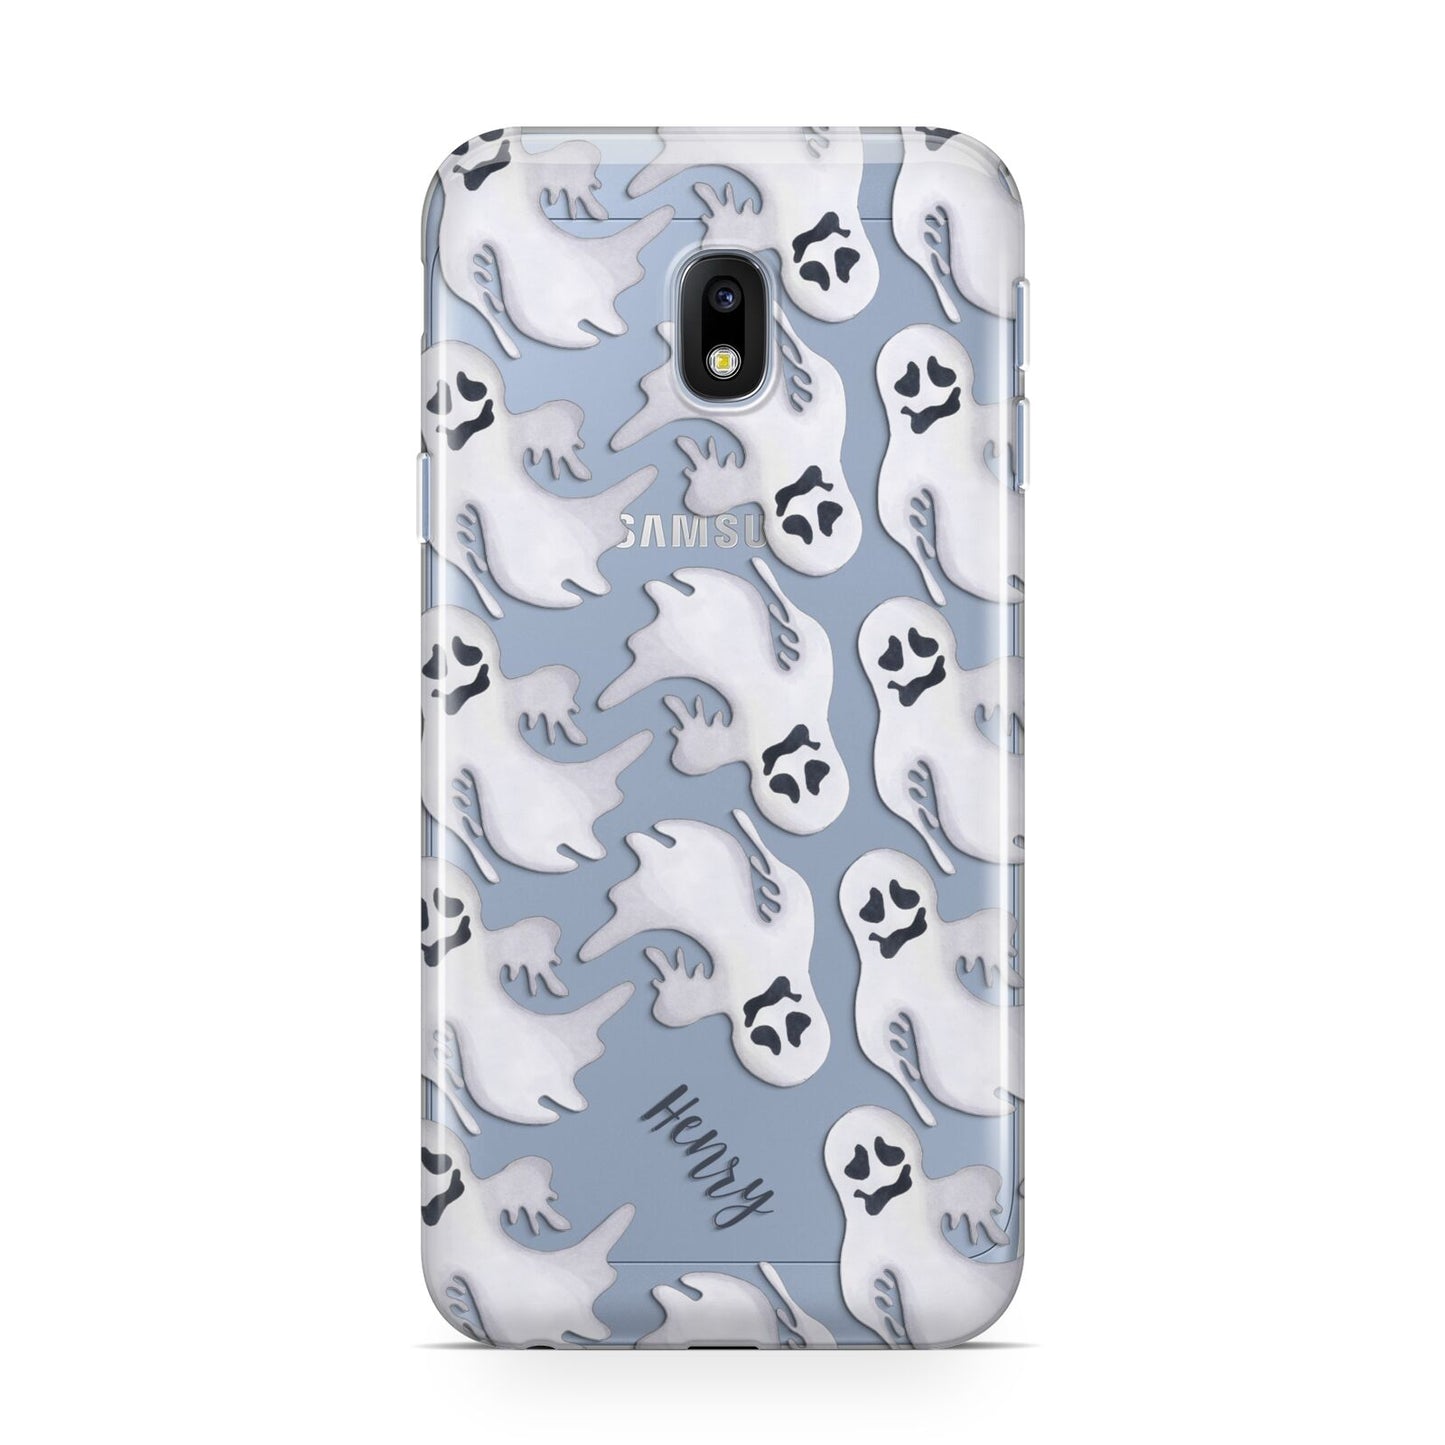 Floaty Ghosts Personalised Samsung Galaxy J3 2017 Case